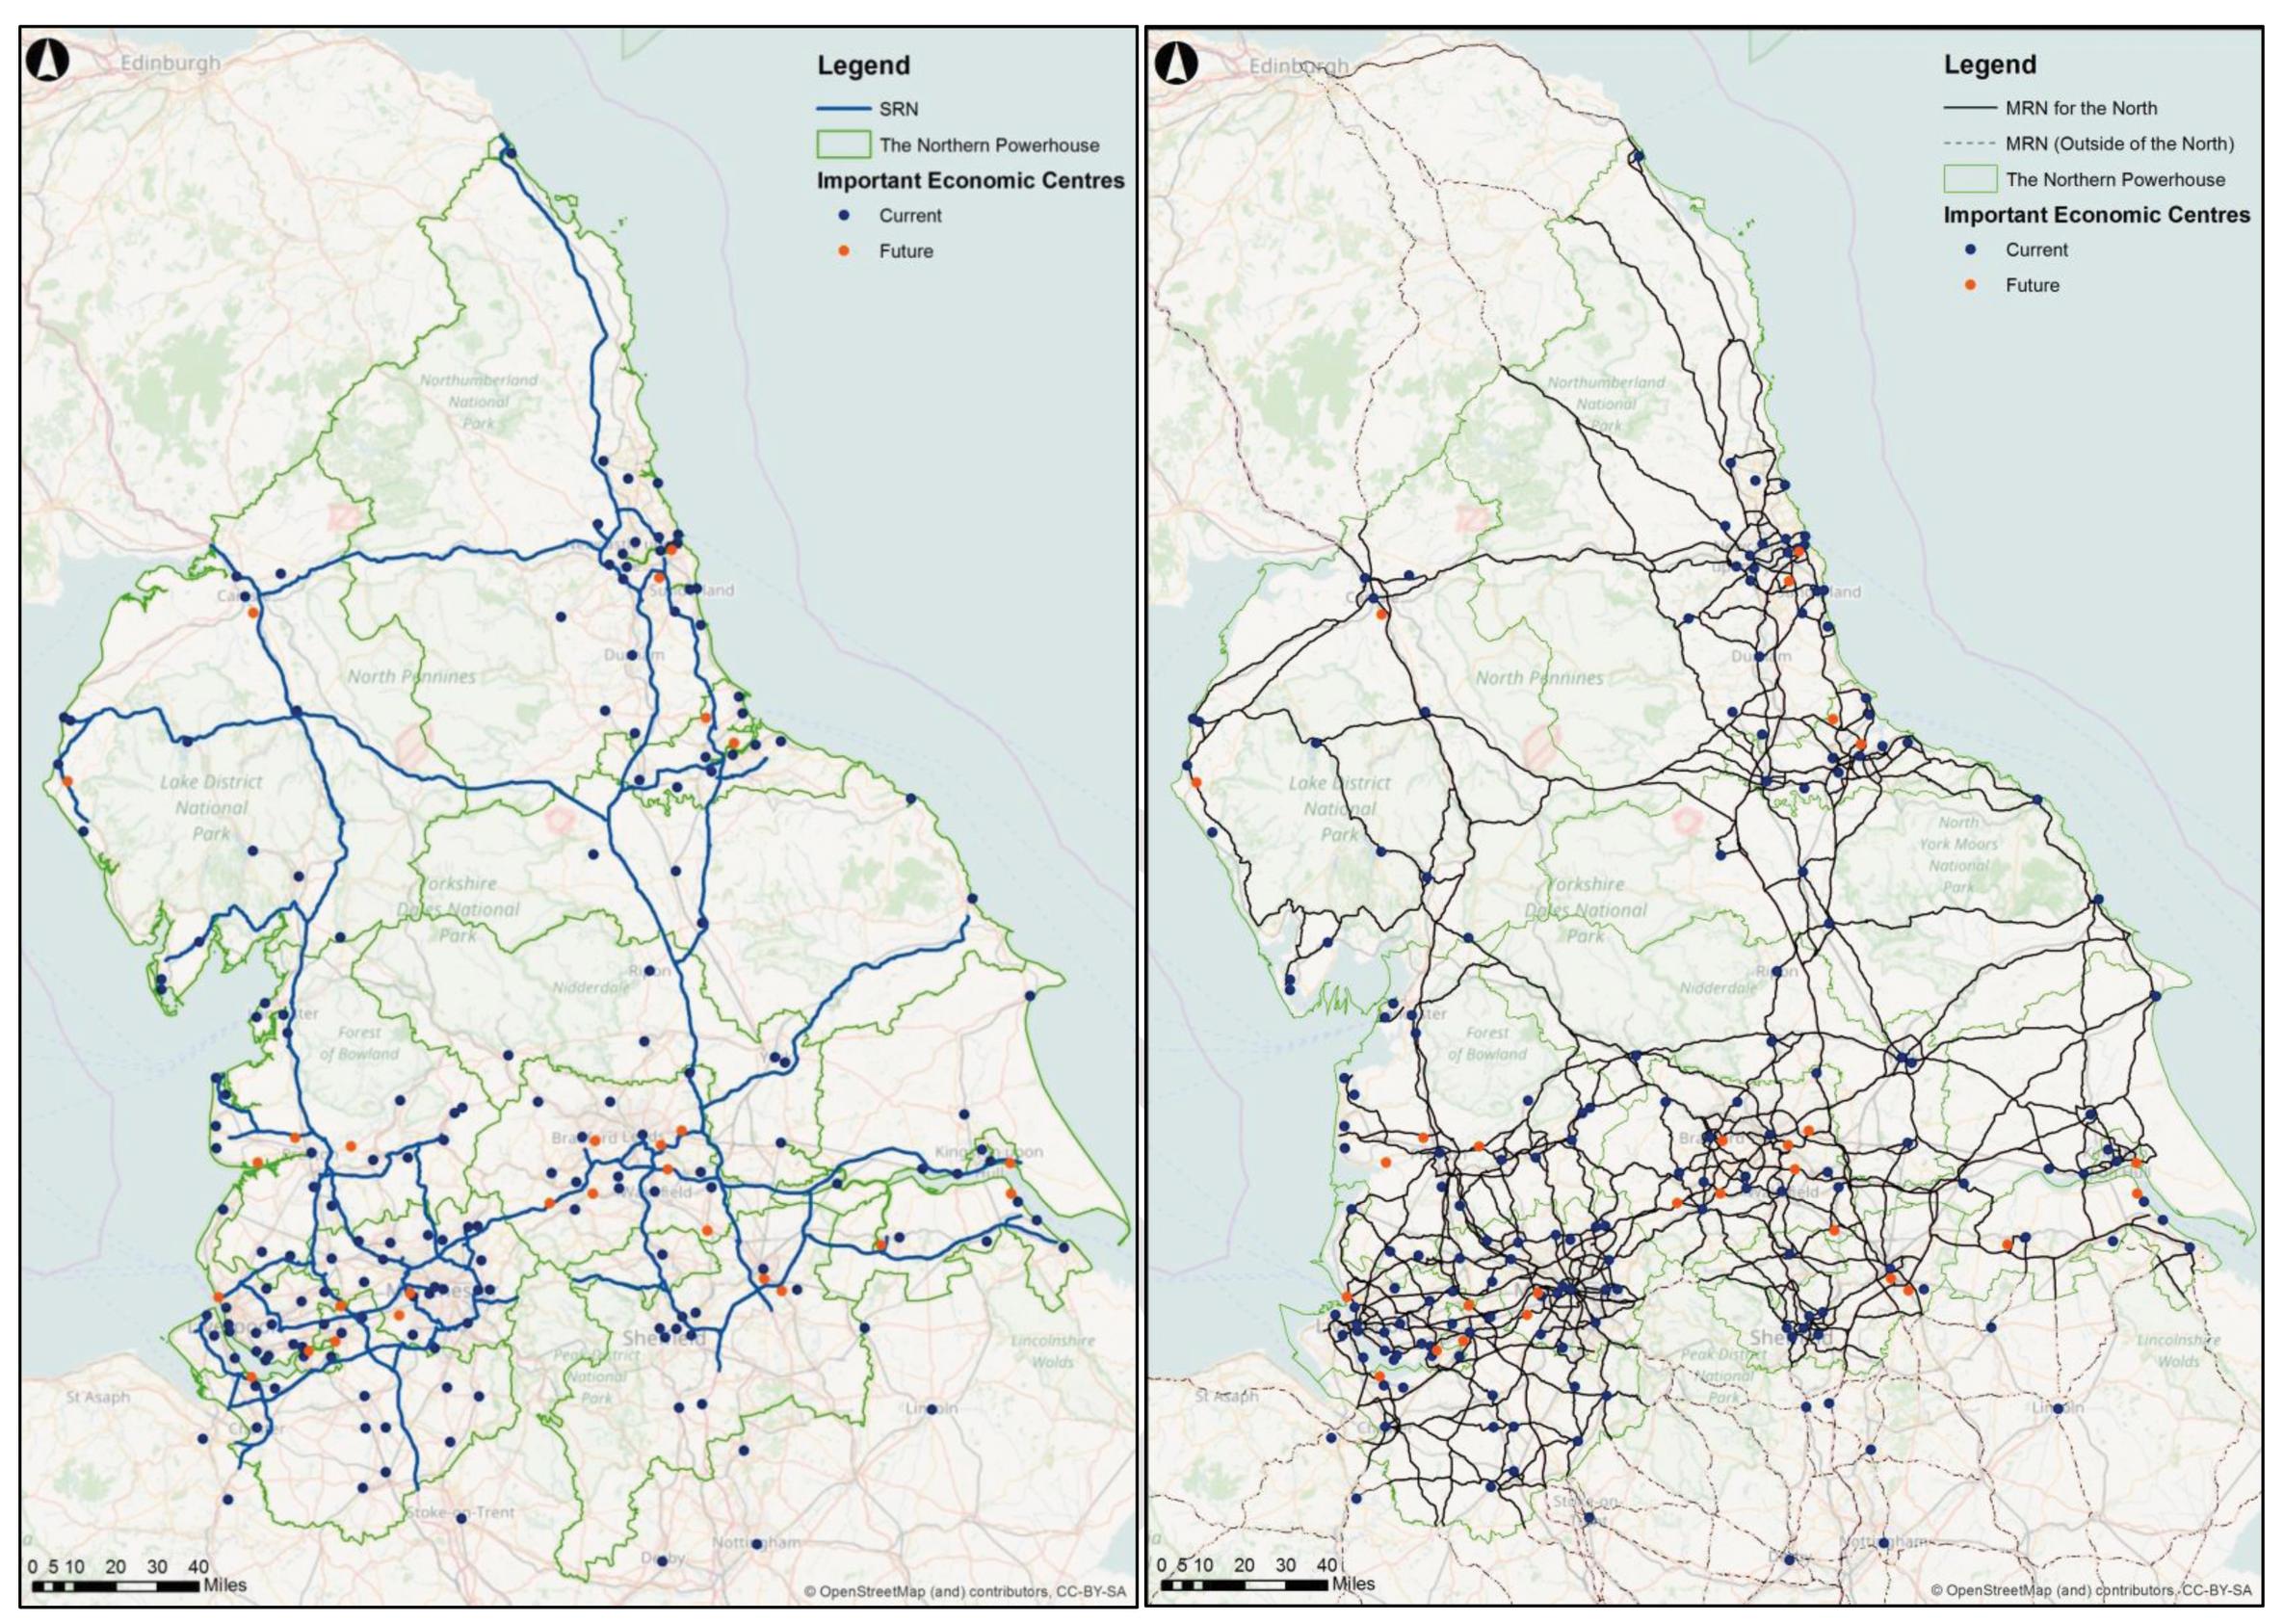 The north of England’s strategic road network of Highways England roads (left), and the proposed major road network (right), combining HE roads and the most important local roads